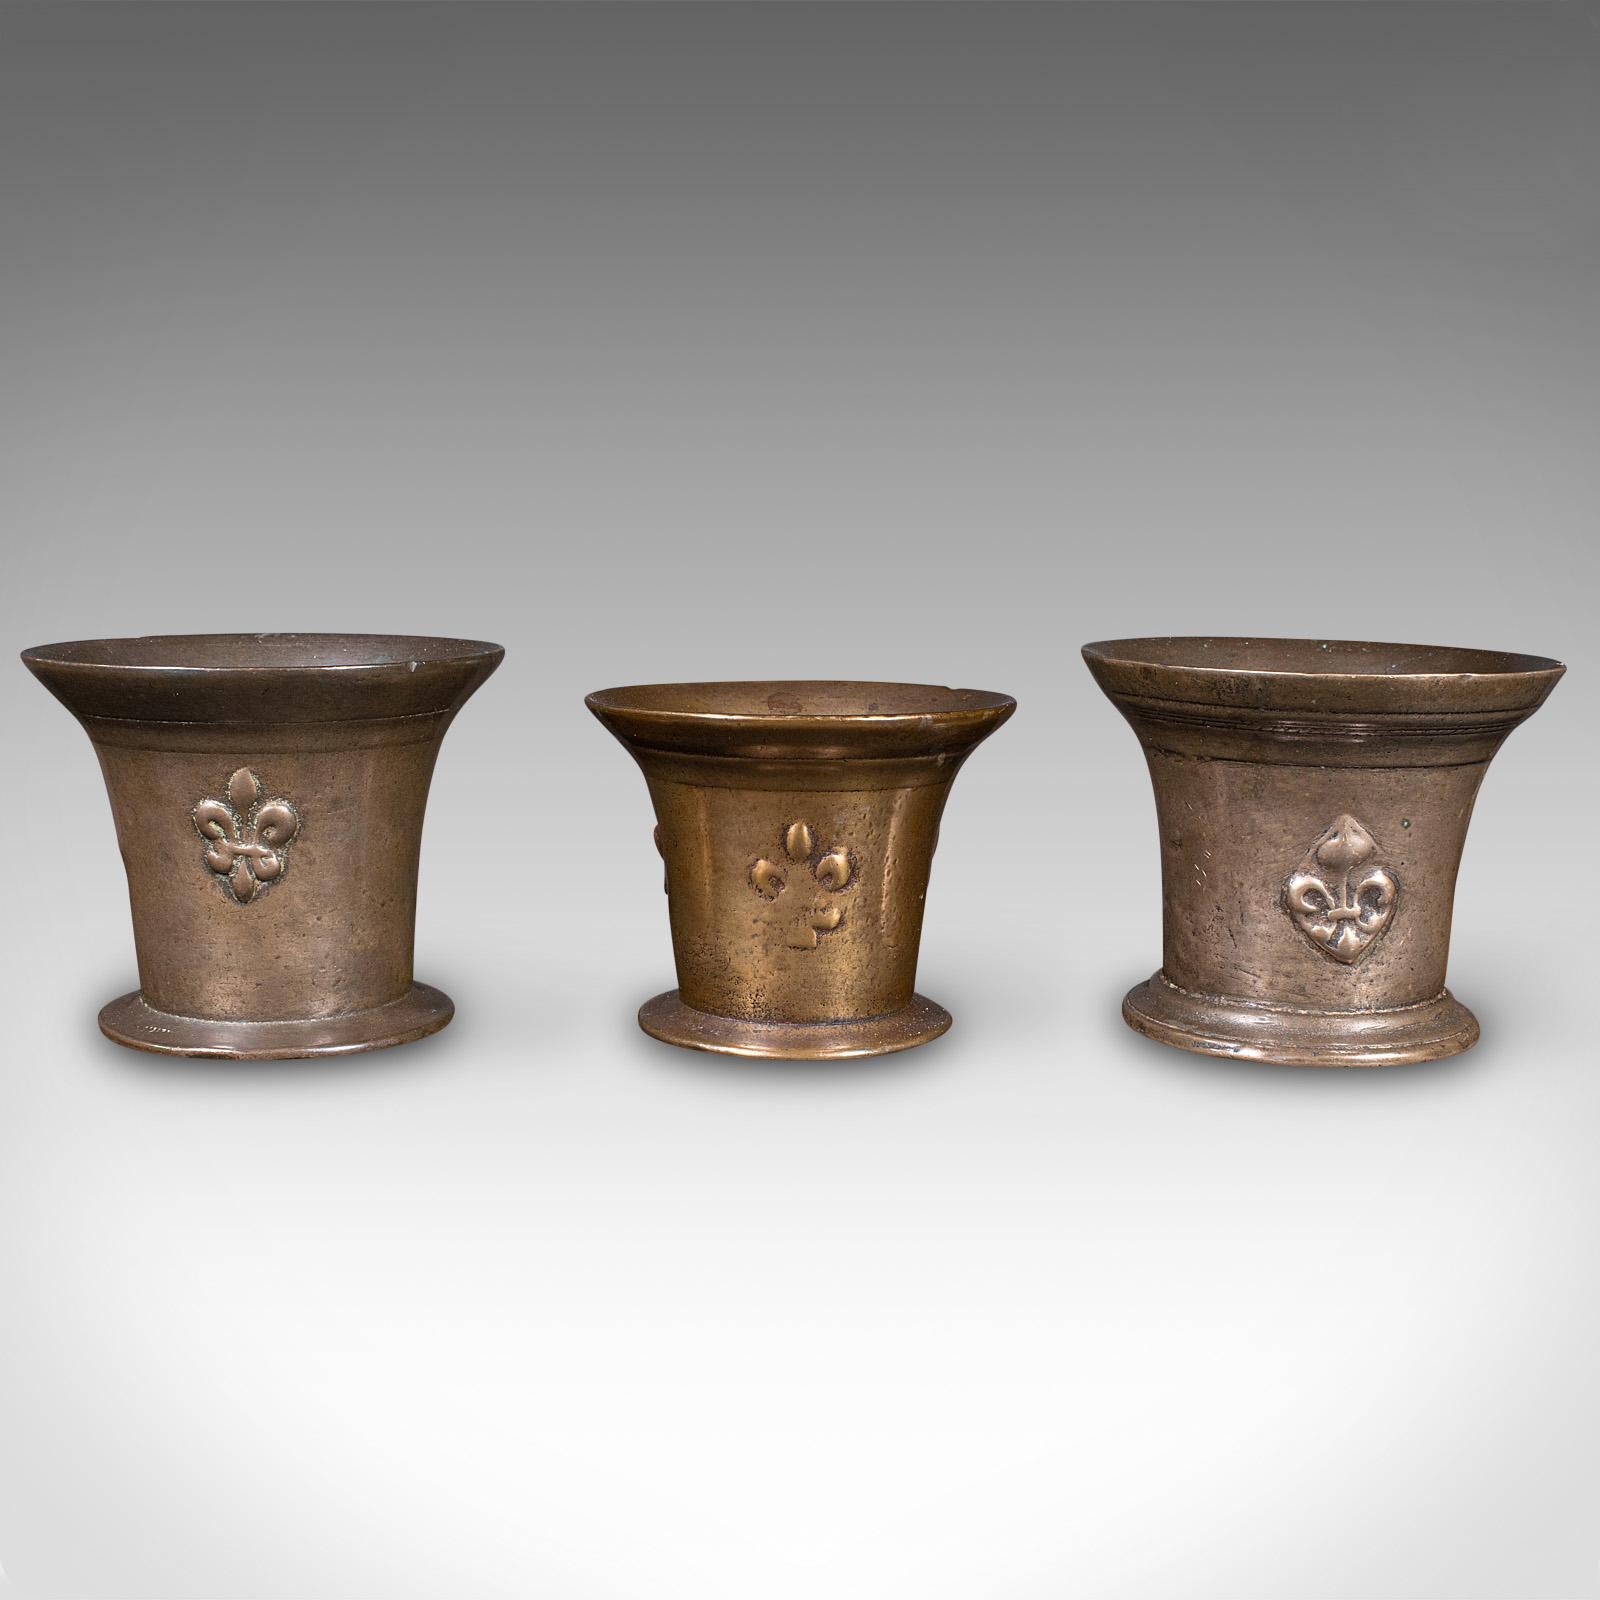 This is a trio of antique mortars. An English, bronze apothecary instrument, dating to the William III period, circa 1700.

Charming trio, ideal for decorative display or as planting pots
Displaying a desirable aged patina and in good original